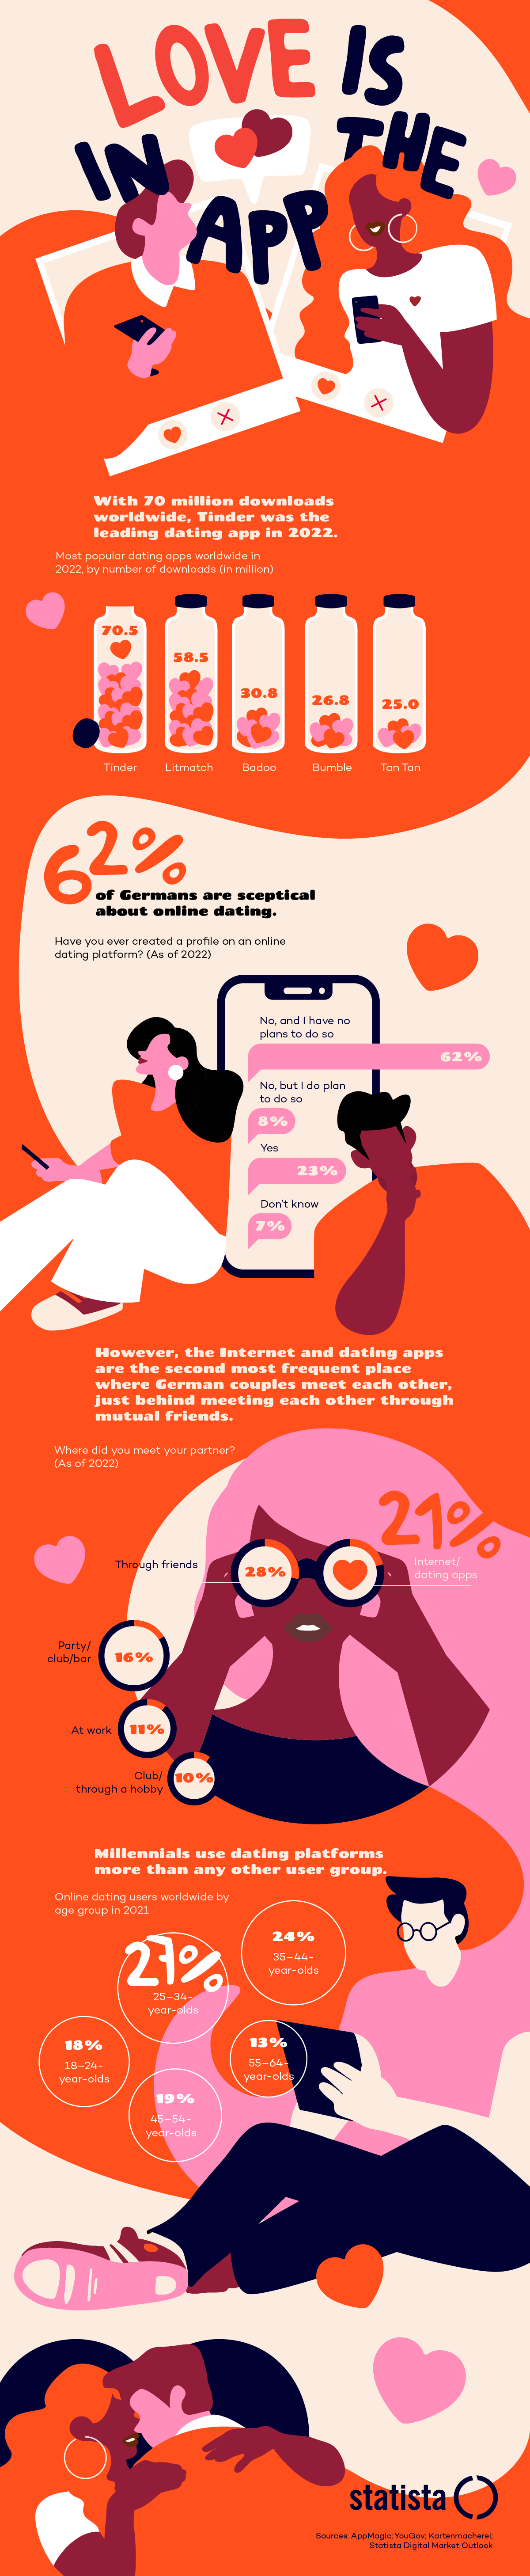 Infographic on dating apps